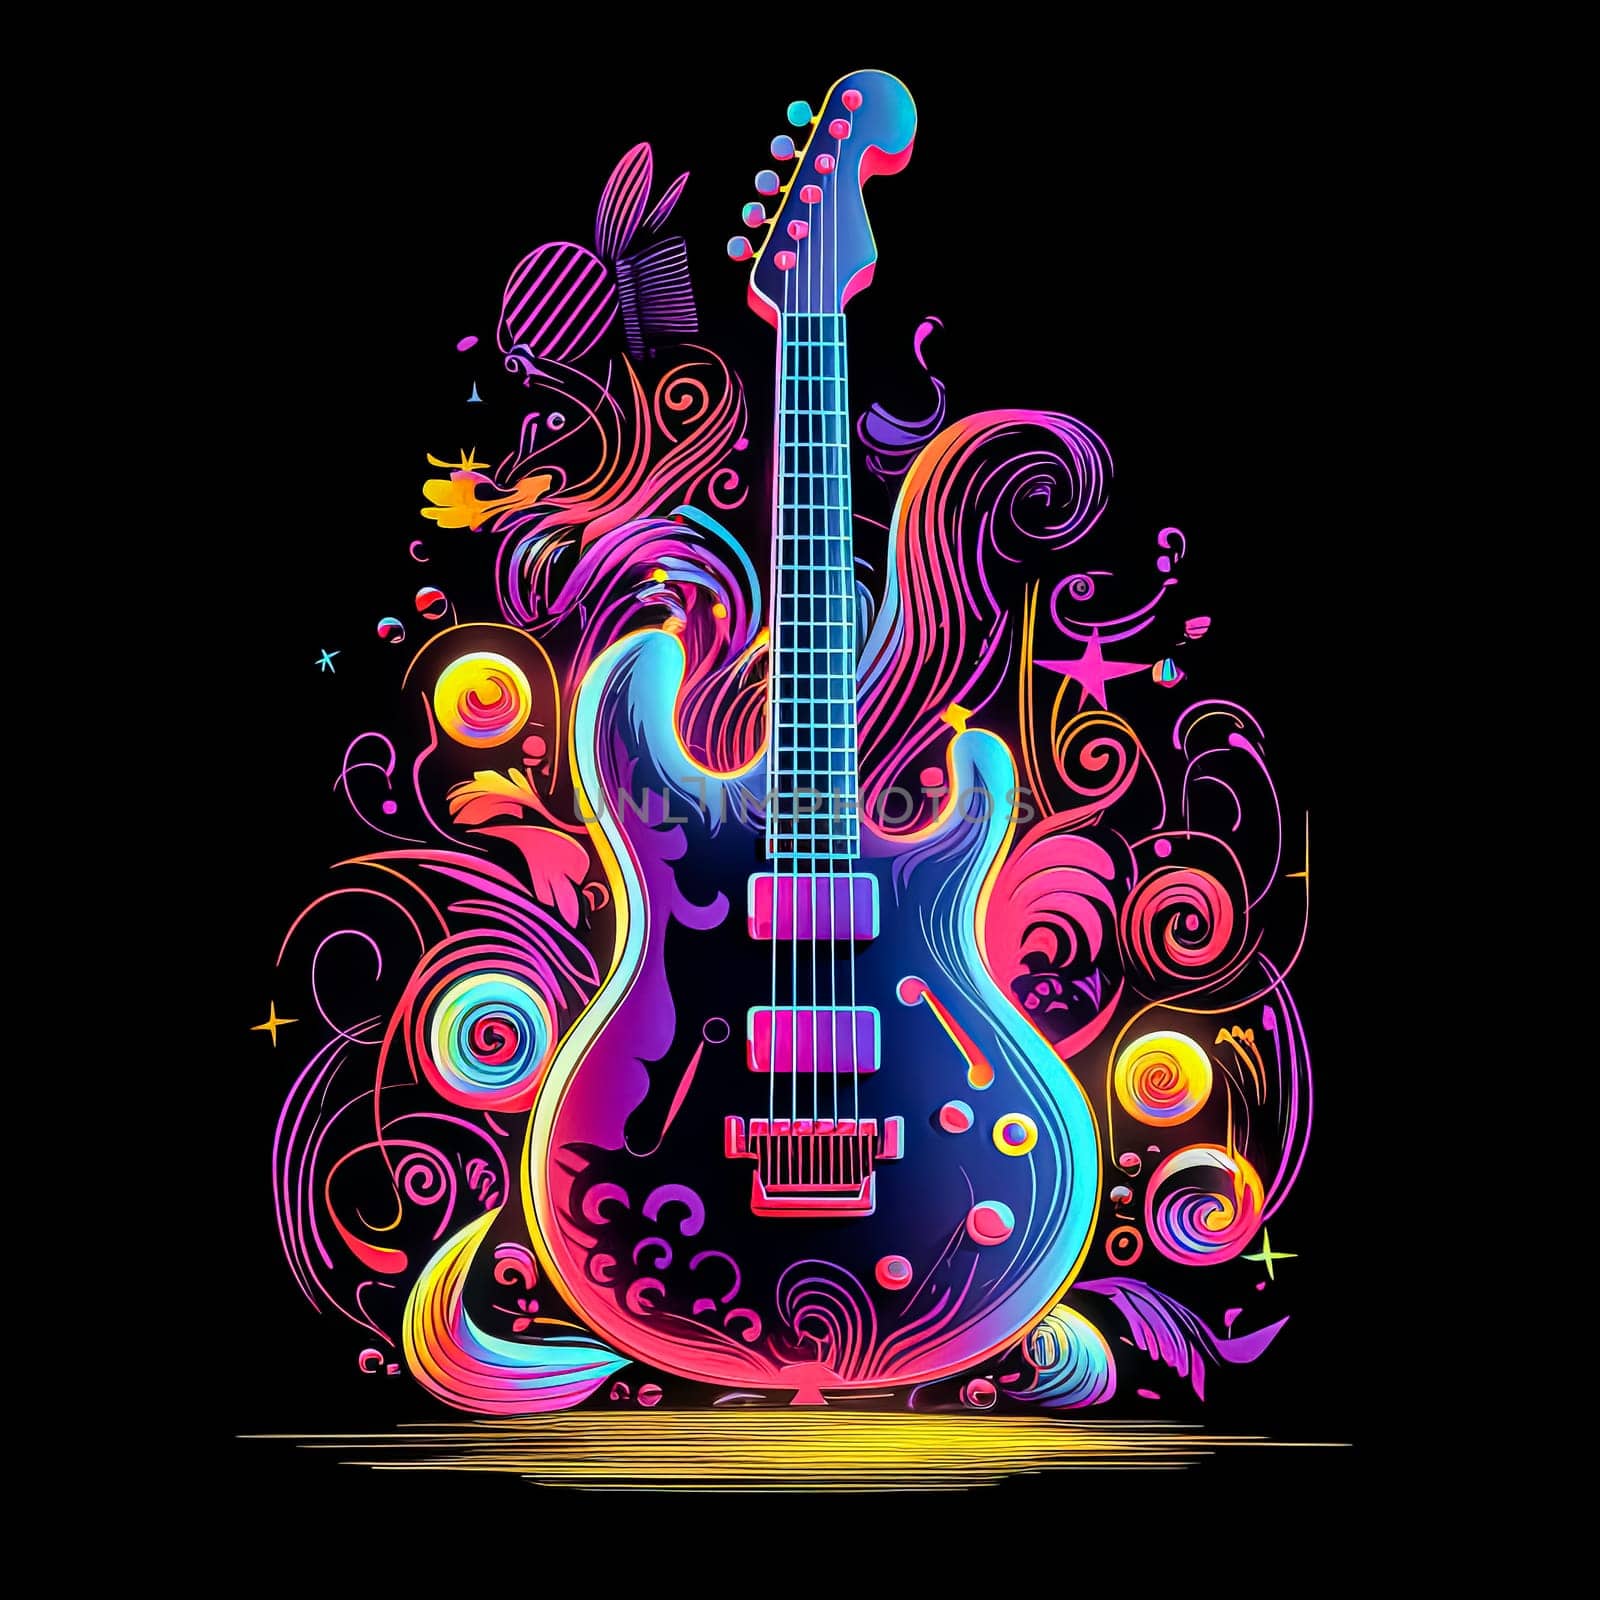 A colorful guitar is shown in a photo with smoke in the background. by Alla_Morozova93